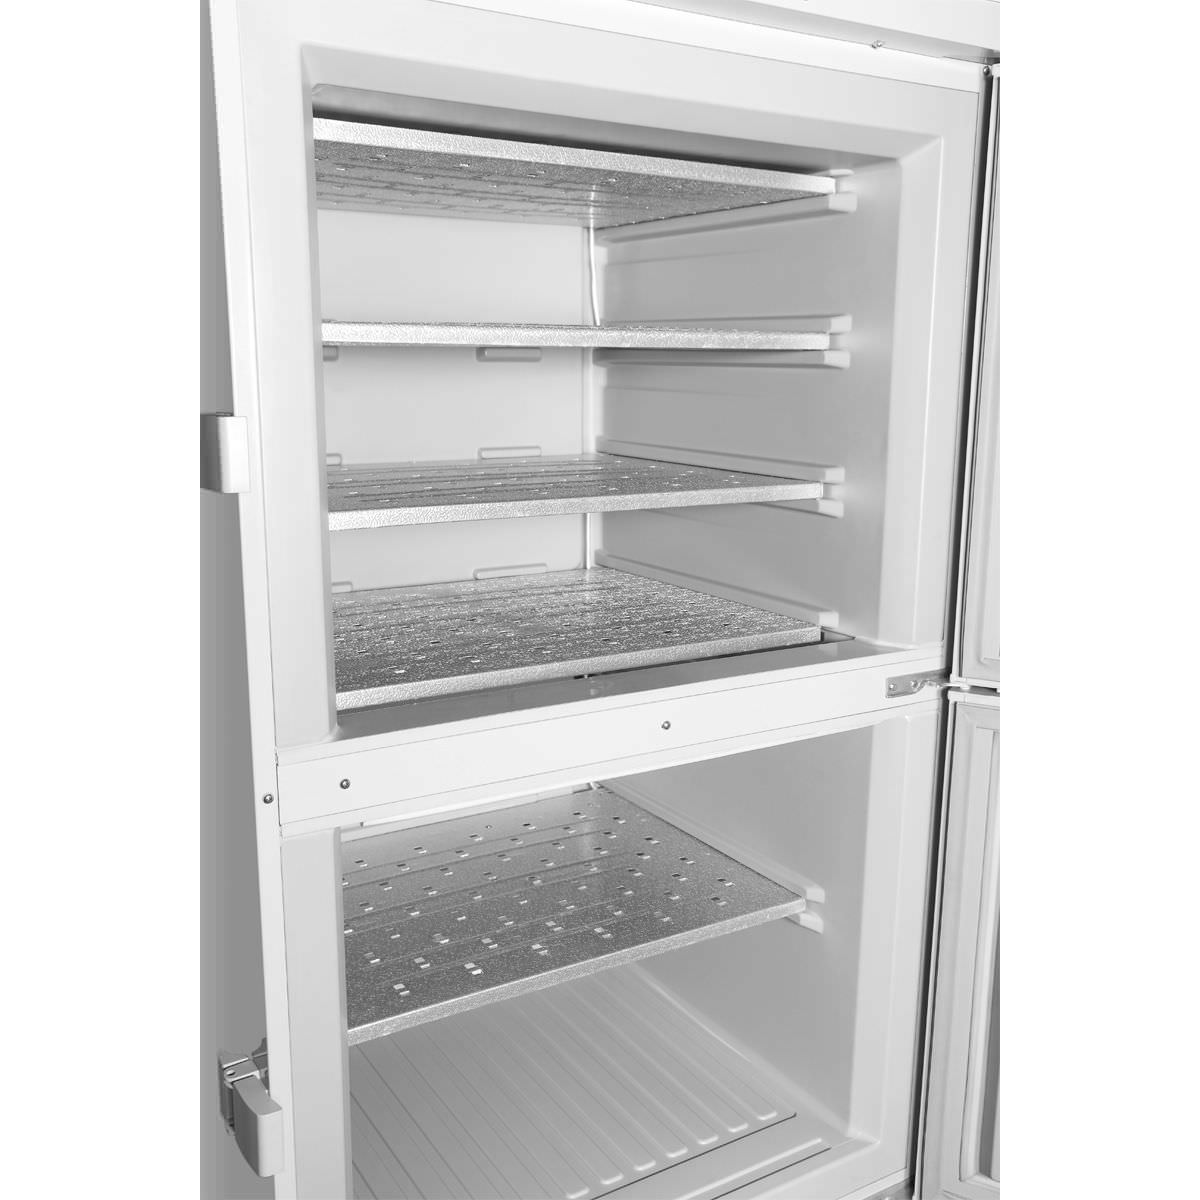 Laboratory freezer / cabinet / with manual defrost / 2-door -40 °C, 490 L | DW-40L508 Haier Medical and Laboratory Products